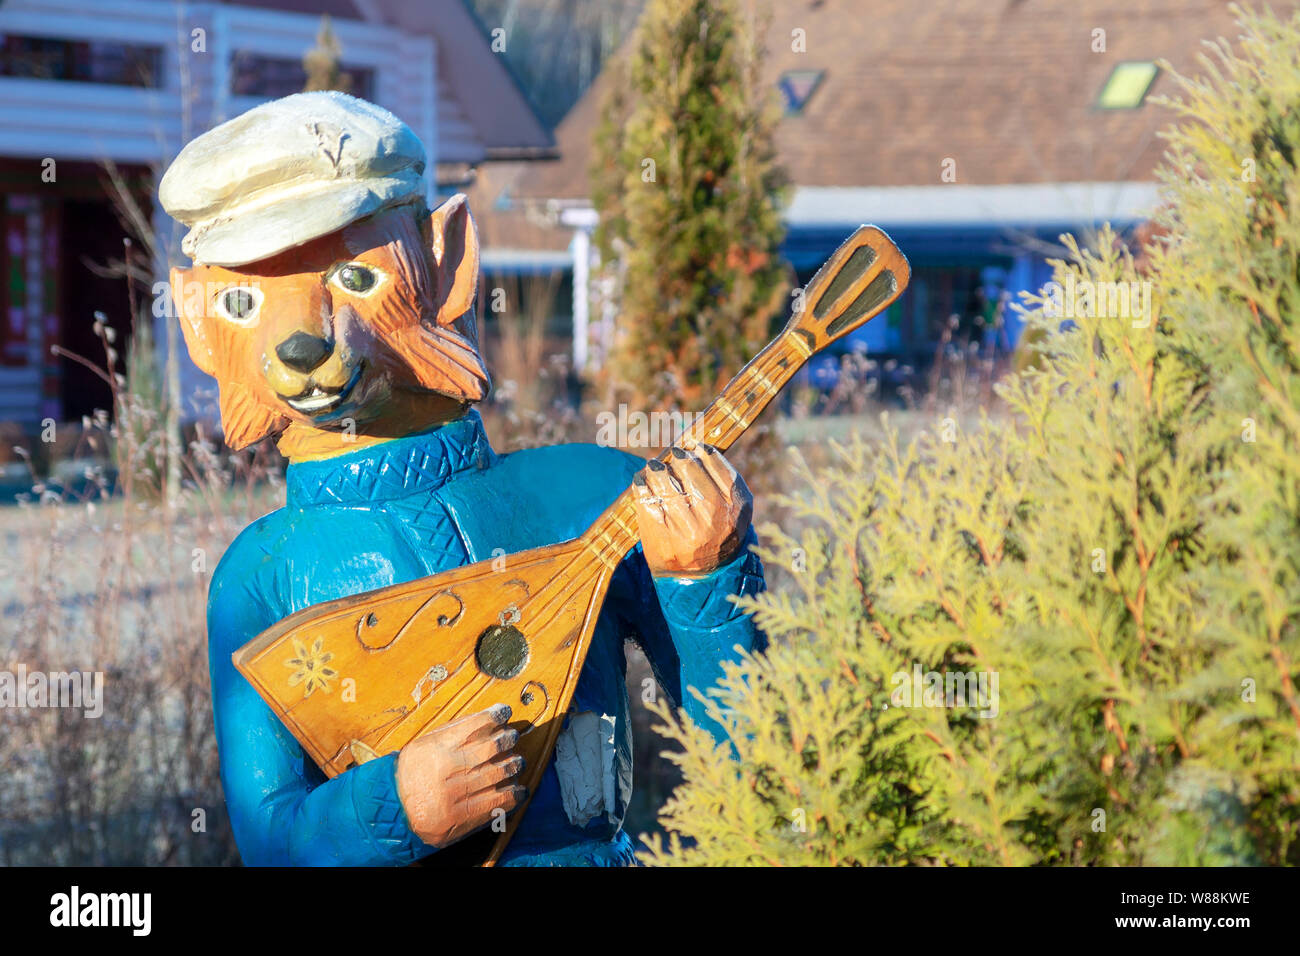 Kaluga, Russia, 11/16/2018. The sculpture of a bear with a balalaika looks out from behind a Christmas tree. Stock Photo